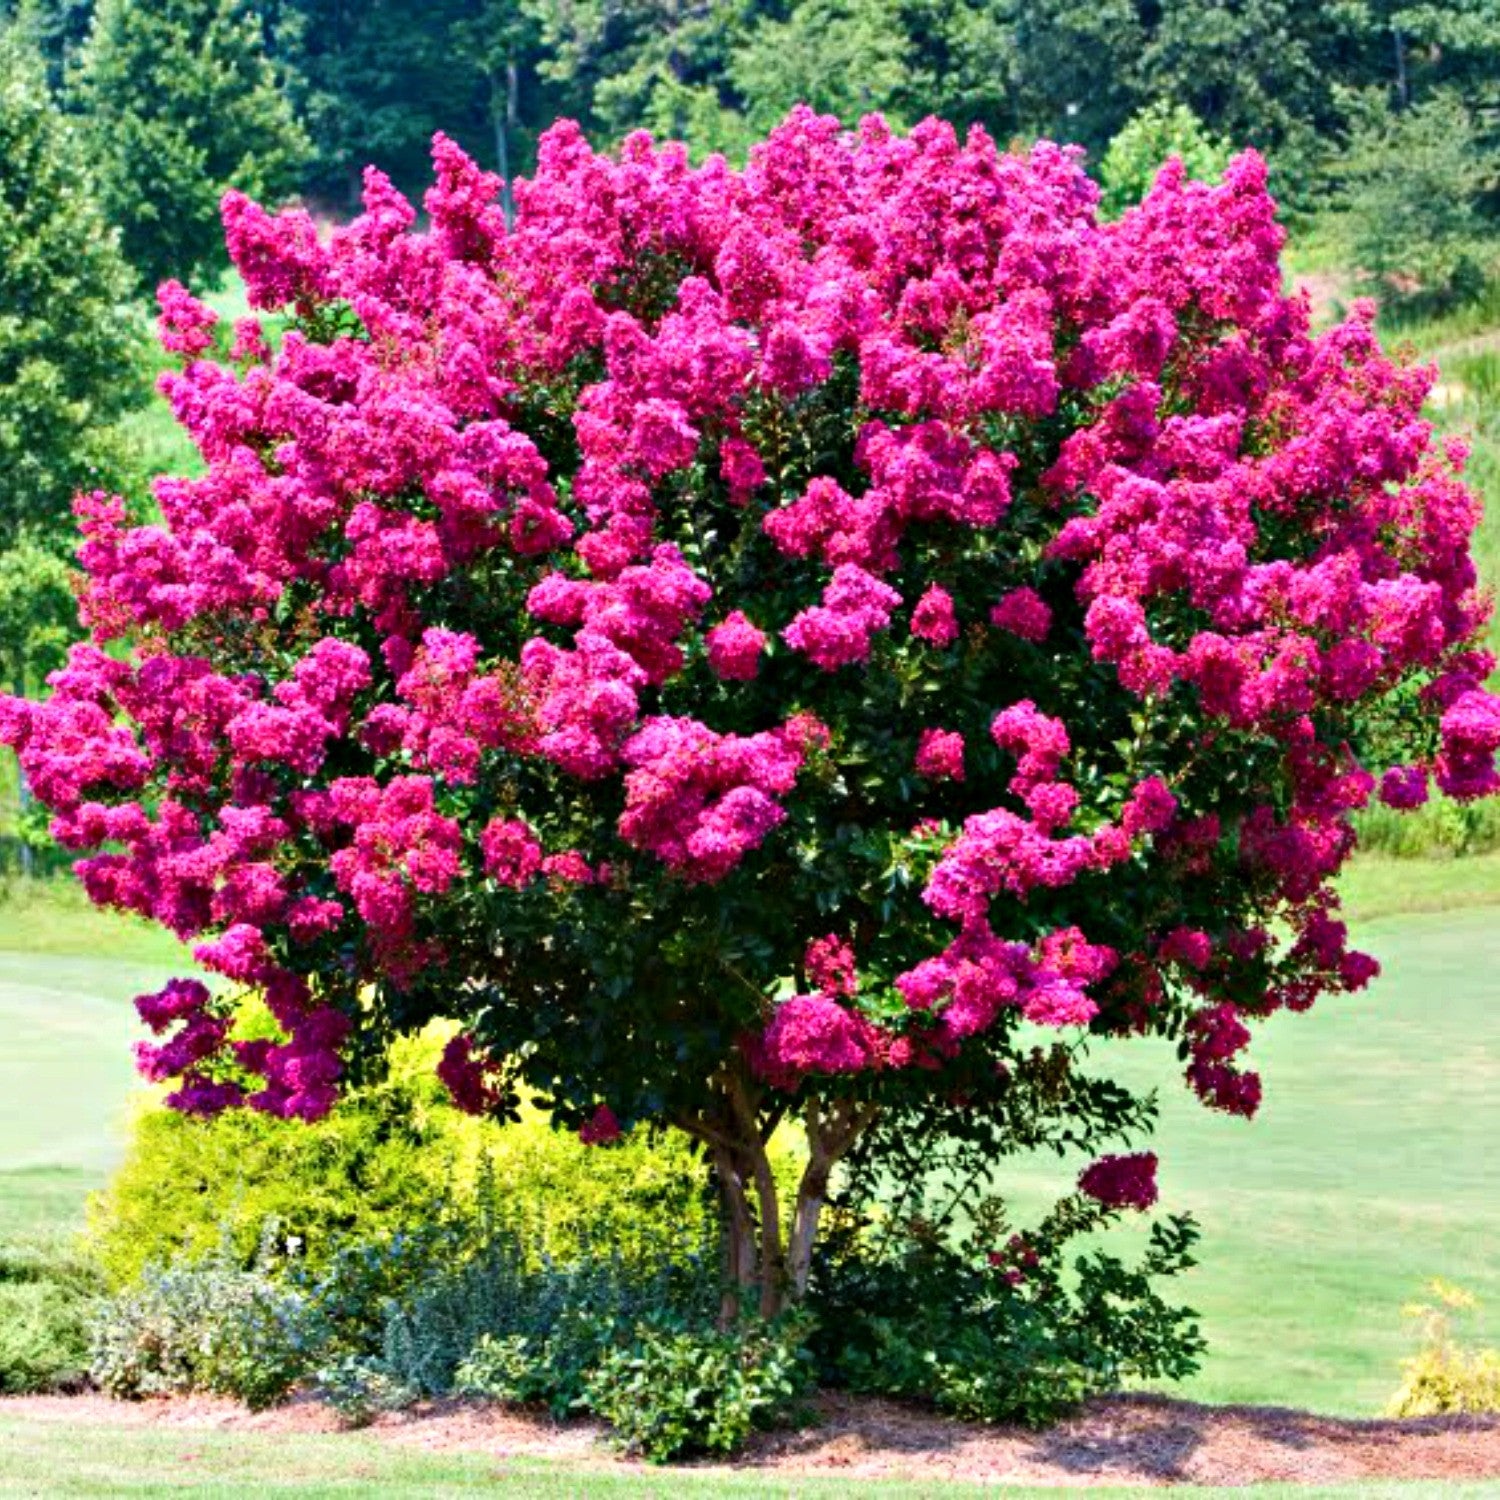 Crapemyrtle - The Lilac of the South!